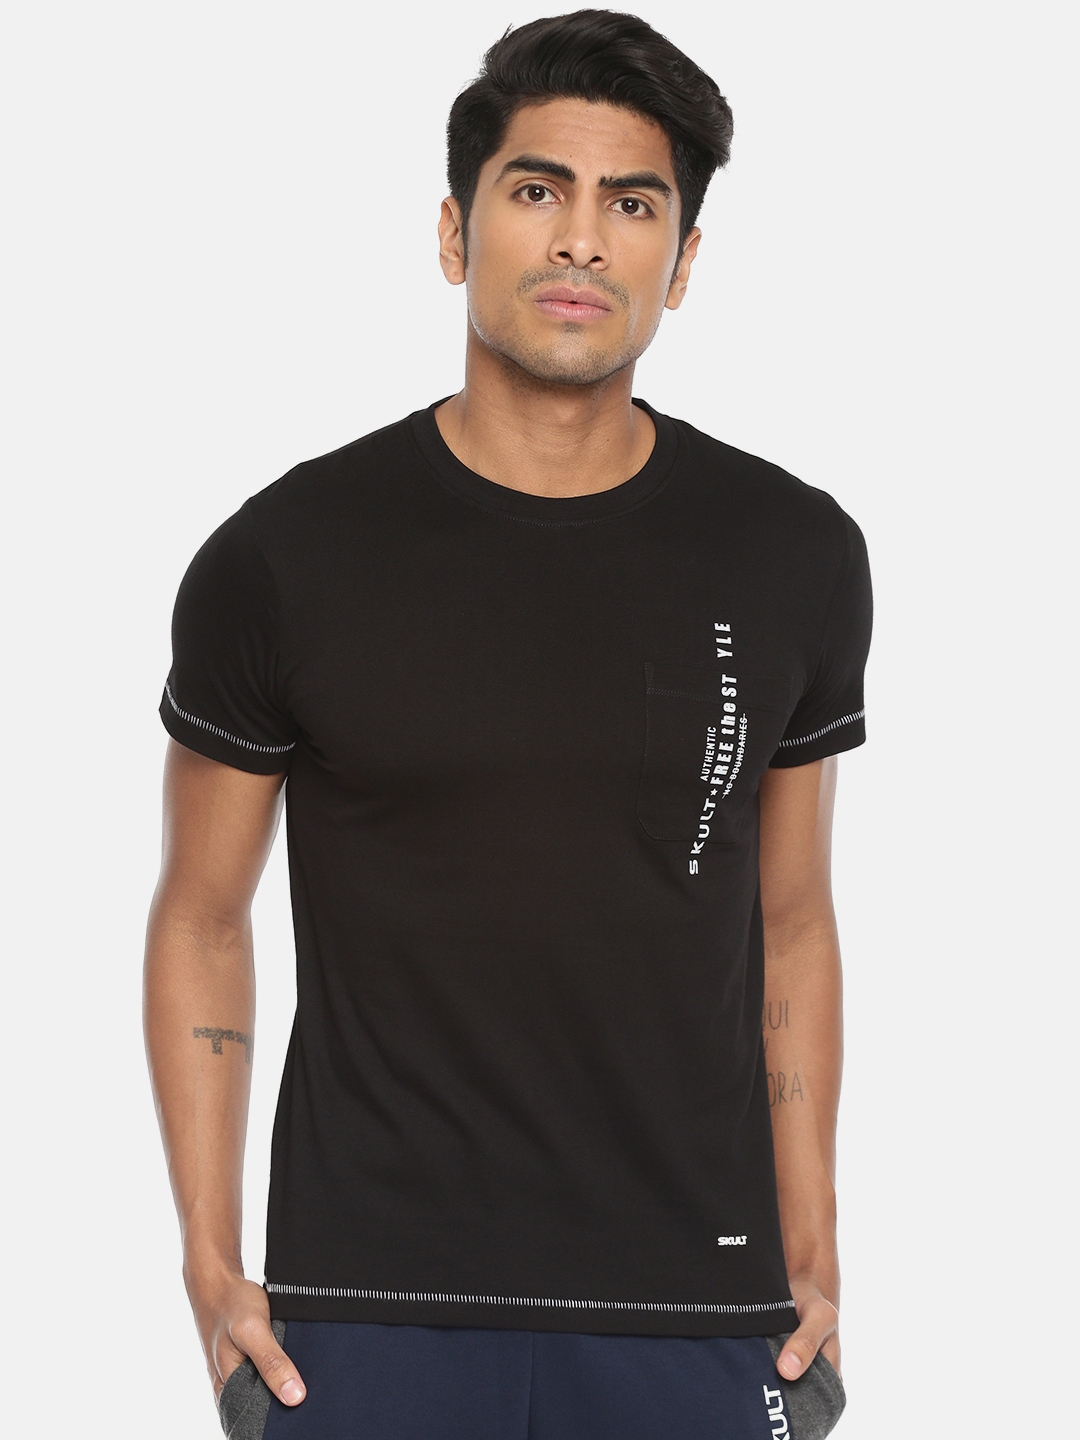 Buy SKULT By Shahid Kapoor Men Black Printed Round Neck Pure Cotton T ...